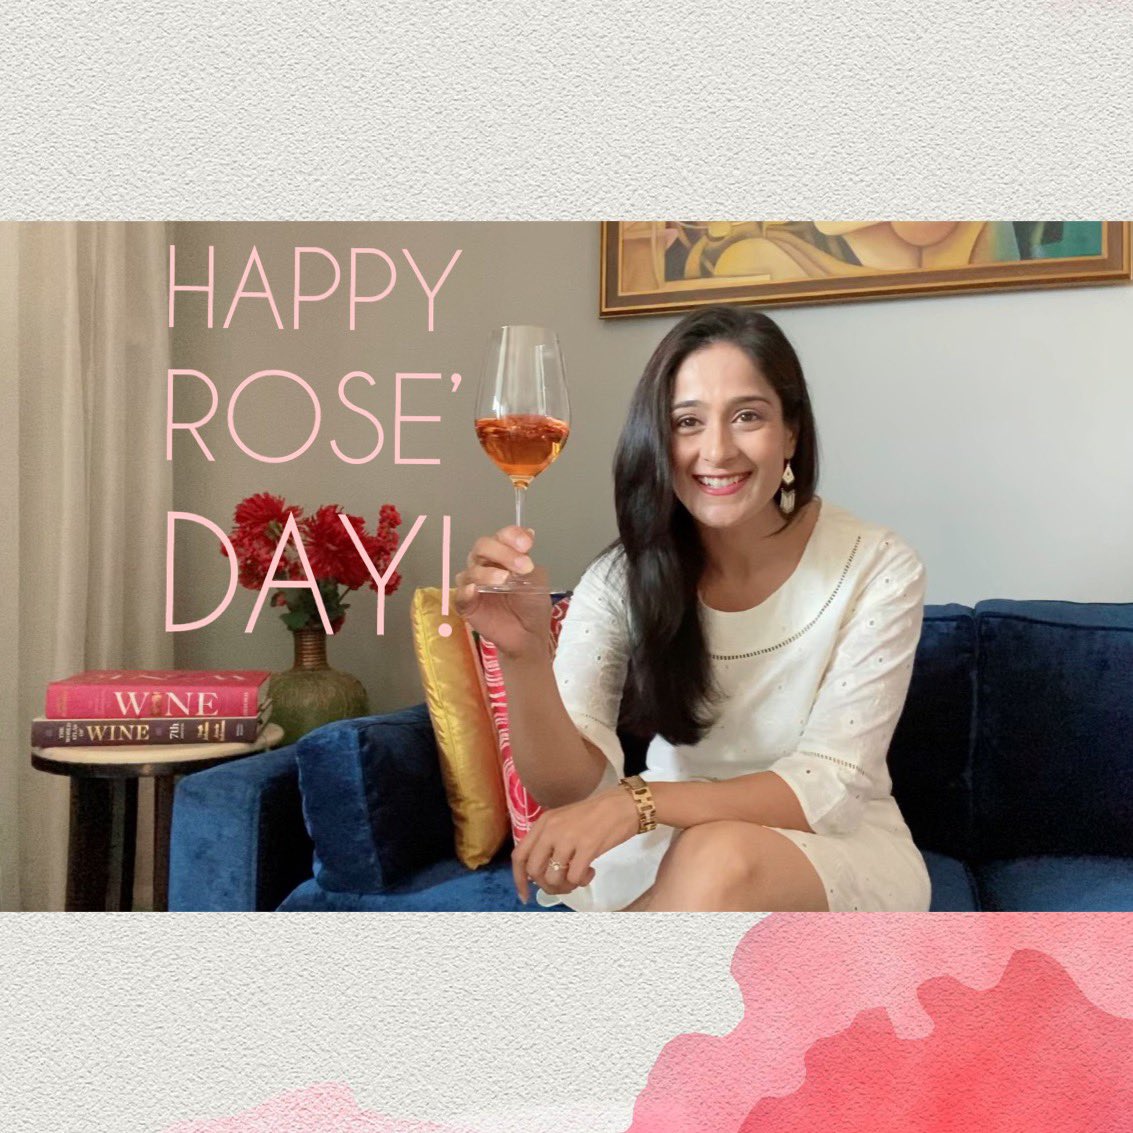 Rose’ - The Perfect Pour for year-long and not just summers. What do you think? #iloverose’ #yeswayrosé #rose’ #wineloversunite #cheers #wines #day